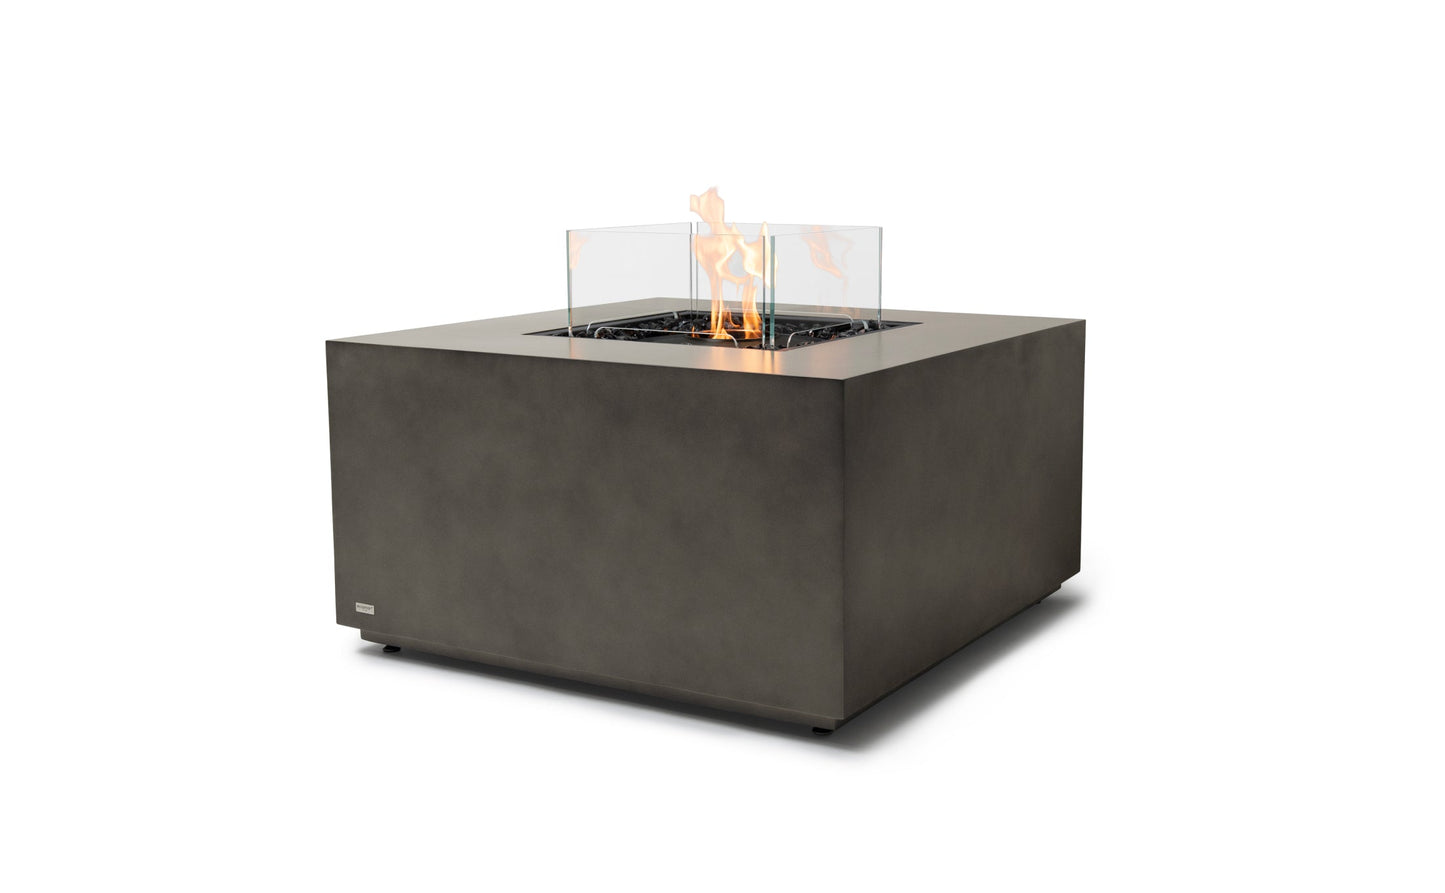 EcoSmart Fire CHASER 38" Natural Outdoor Fire Pit Table with Black Burner by Mad Design Group